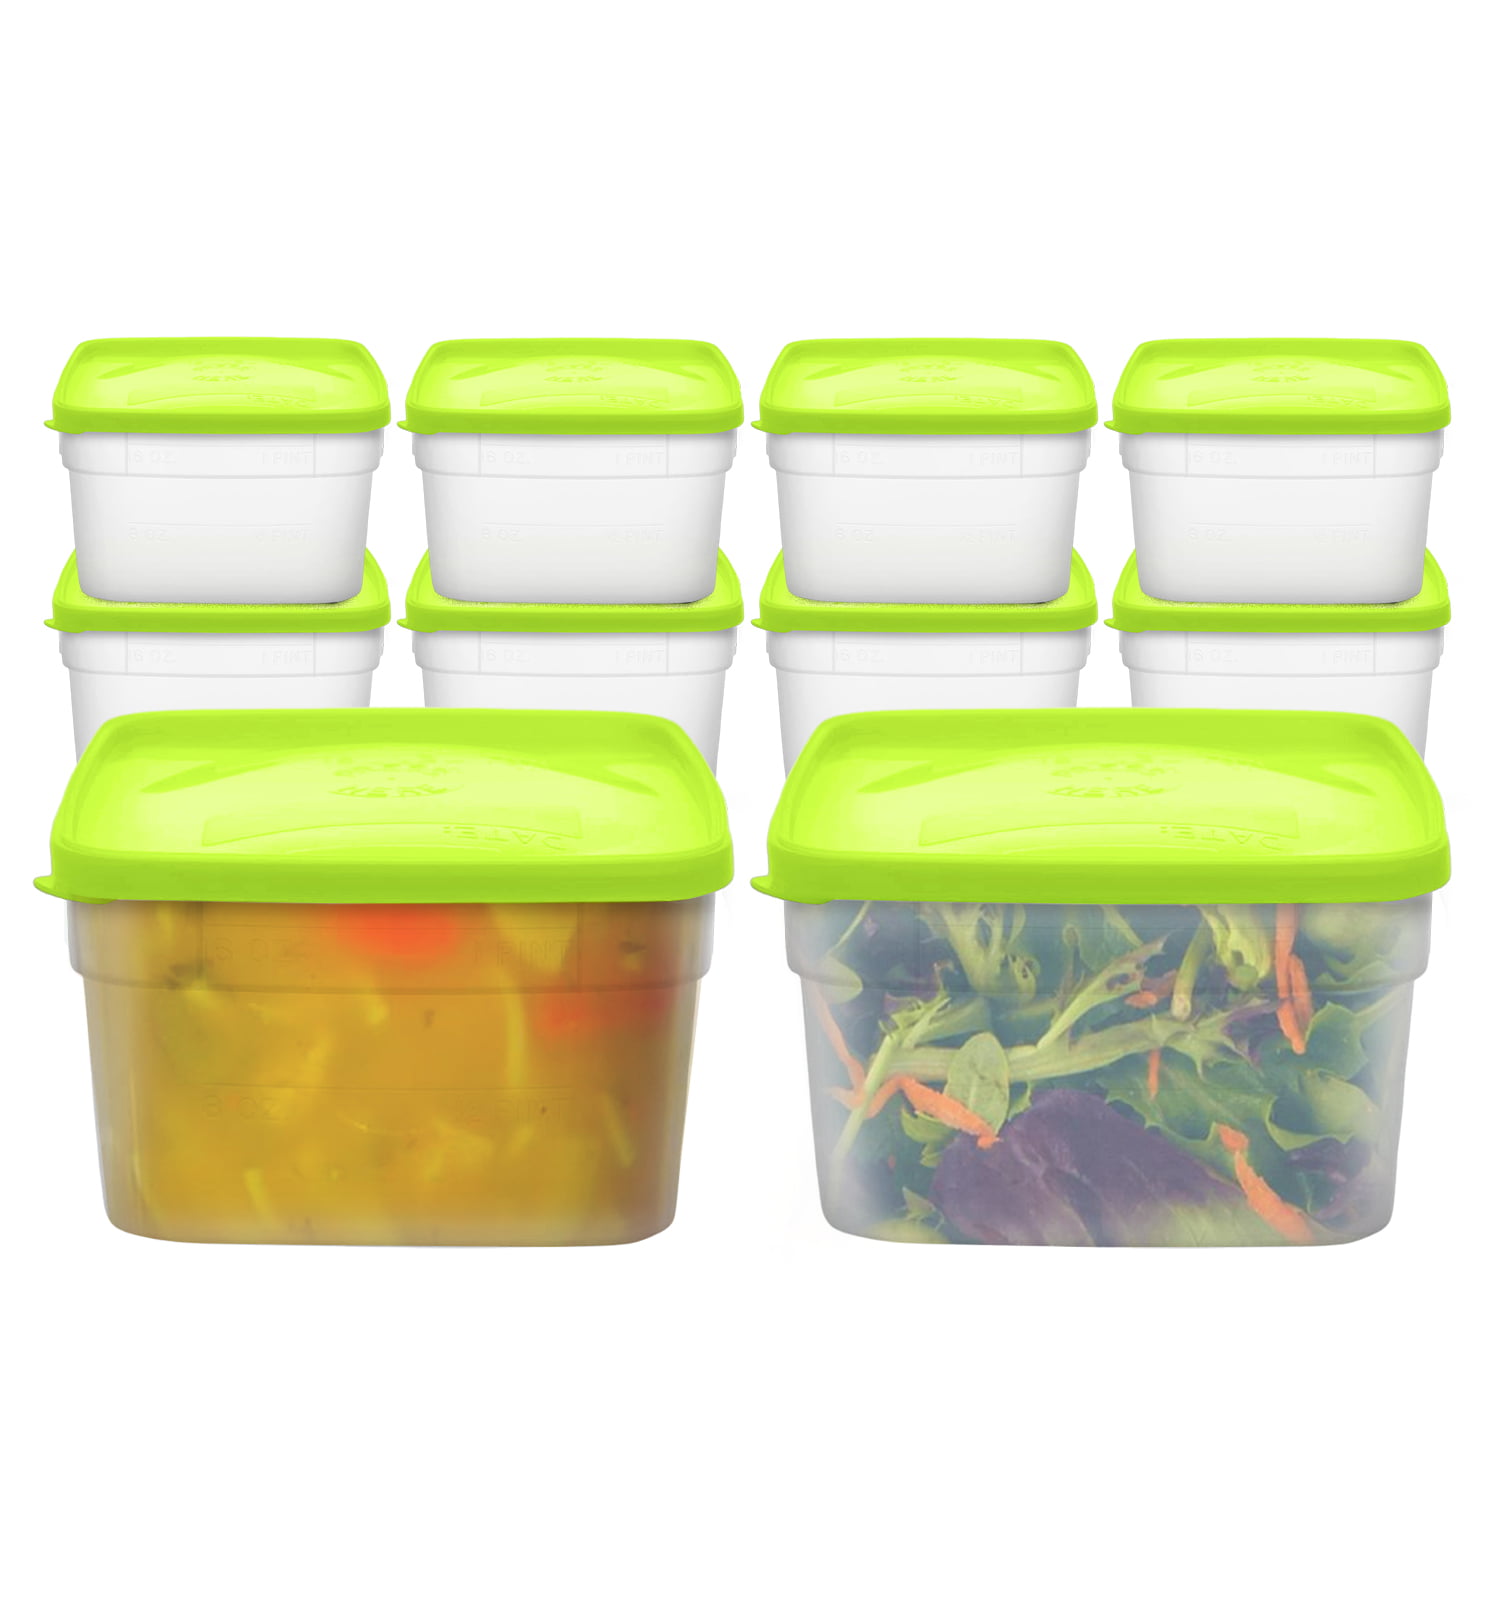 10 liter Food Container Pantry Box Lid Clip Lock Handle Meal Storage Carrier